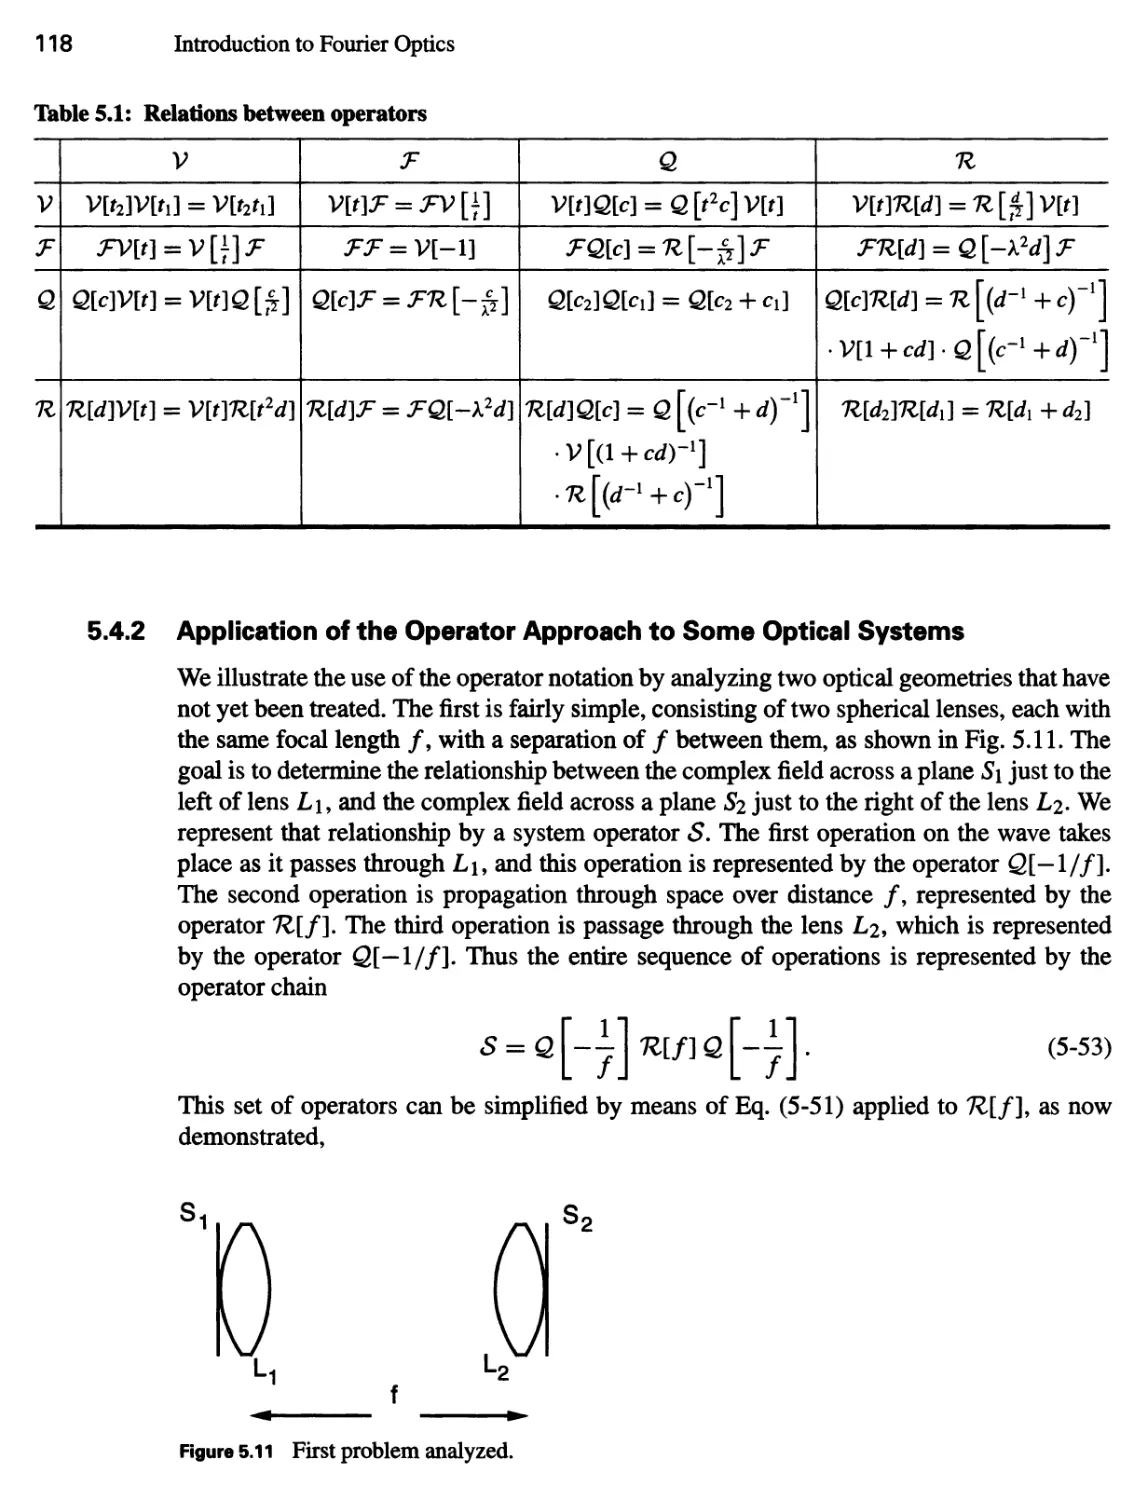 5.4.2 Application of the Operator Approach to Some Optical Systems 118